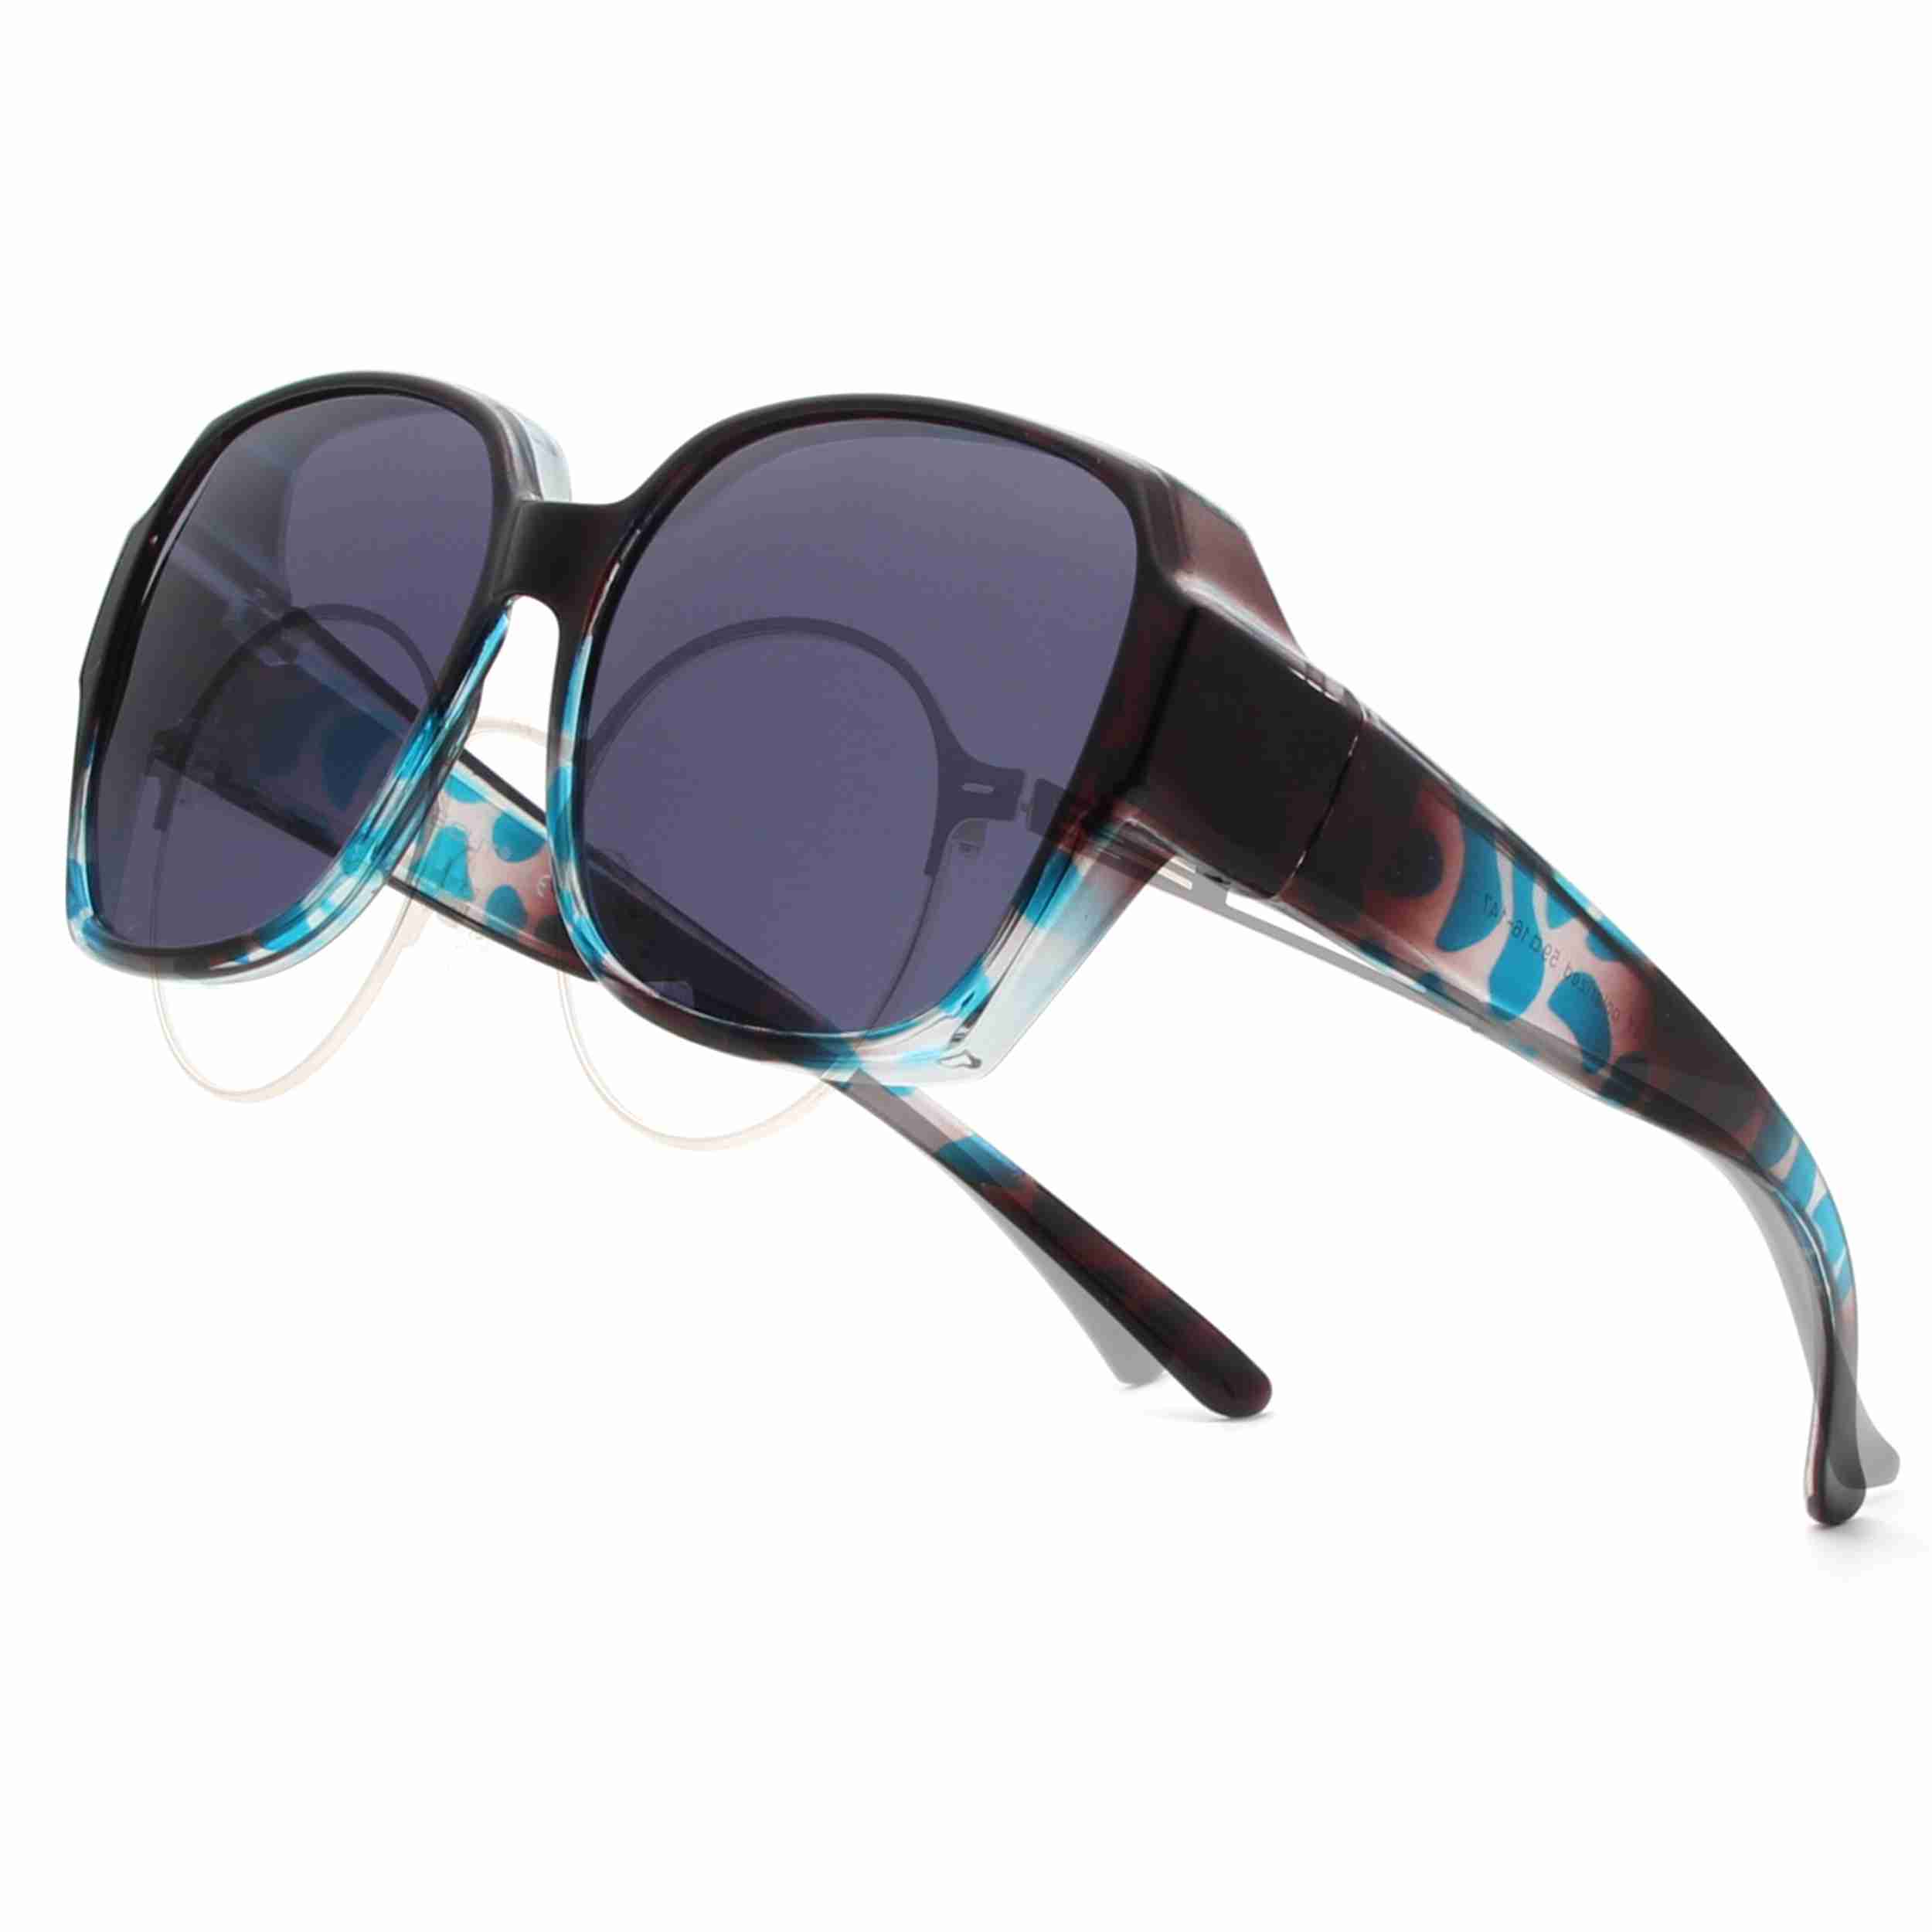 fit-over-sunglasses-for-women with cash back rebate